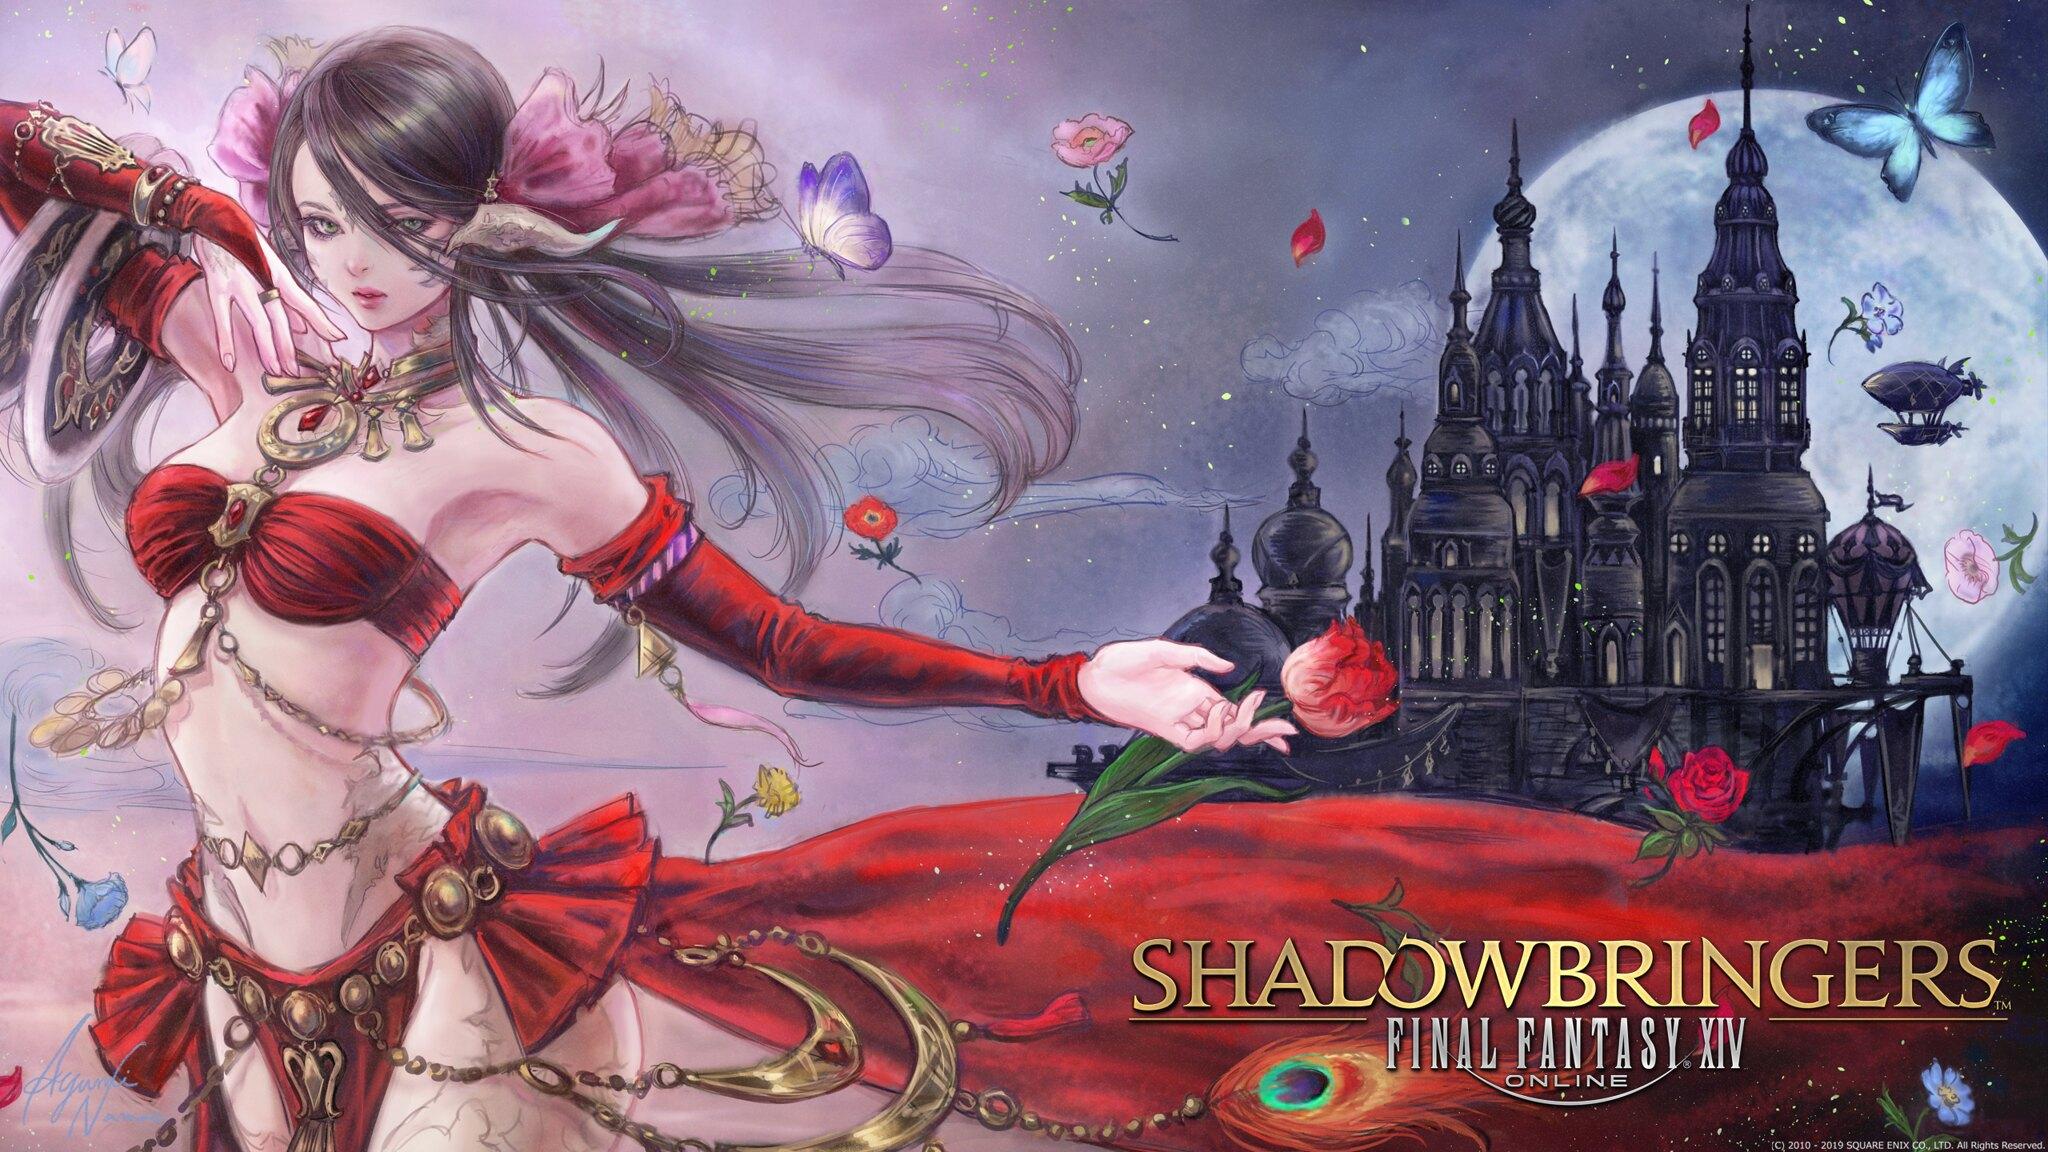 Celebrate the Launch of Final Fantasy XIV: Shadowbringers